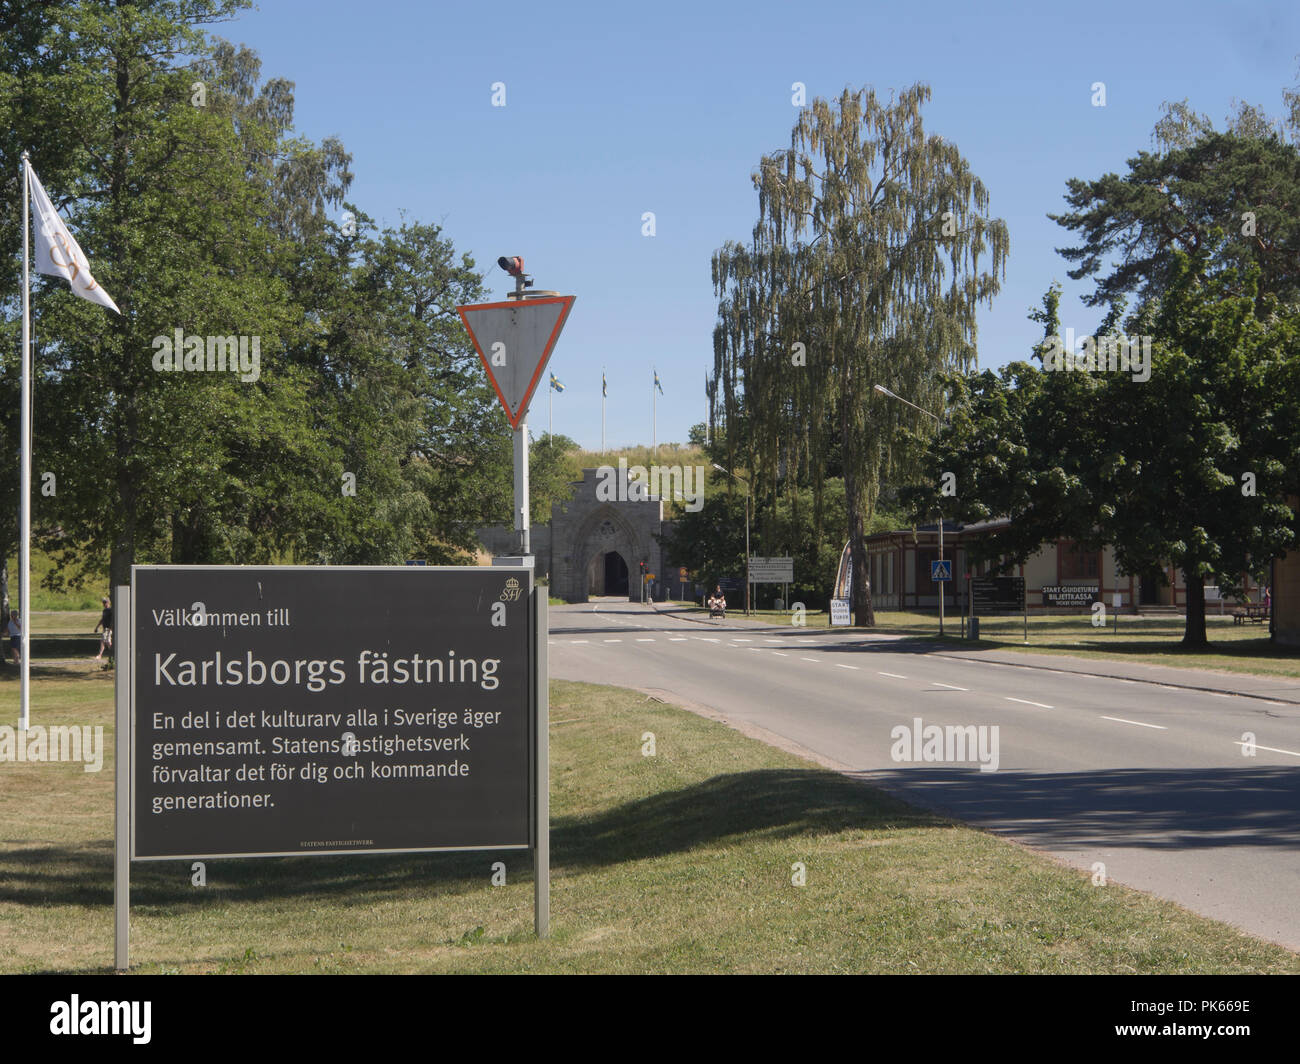 Karlsborg Fortress in Västra Götaland County in Sweden was built as central defense and reserve capital, now an idyllic and varied tourist attraction Stock Photo